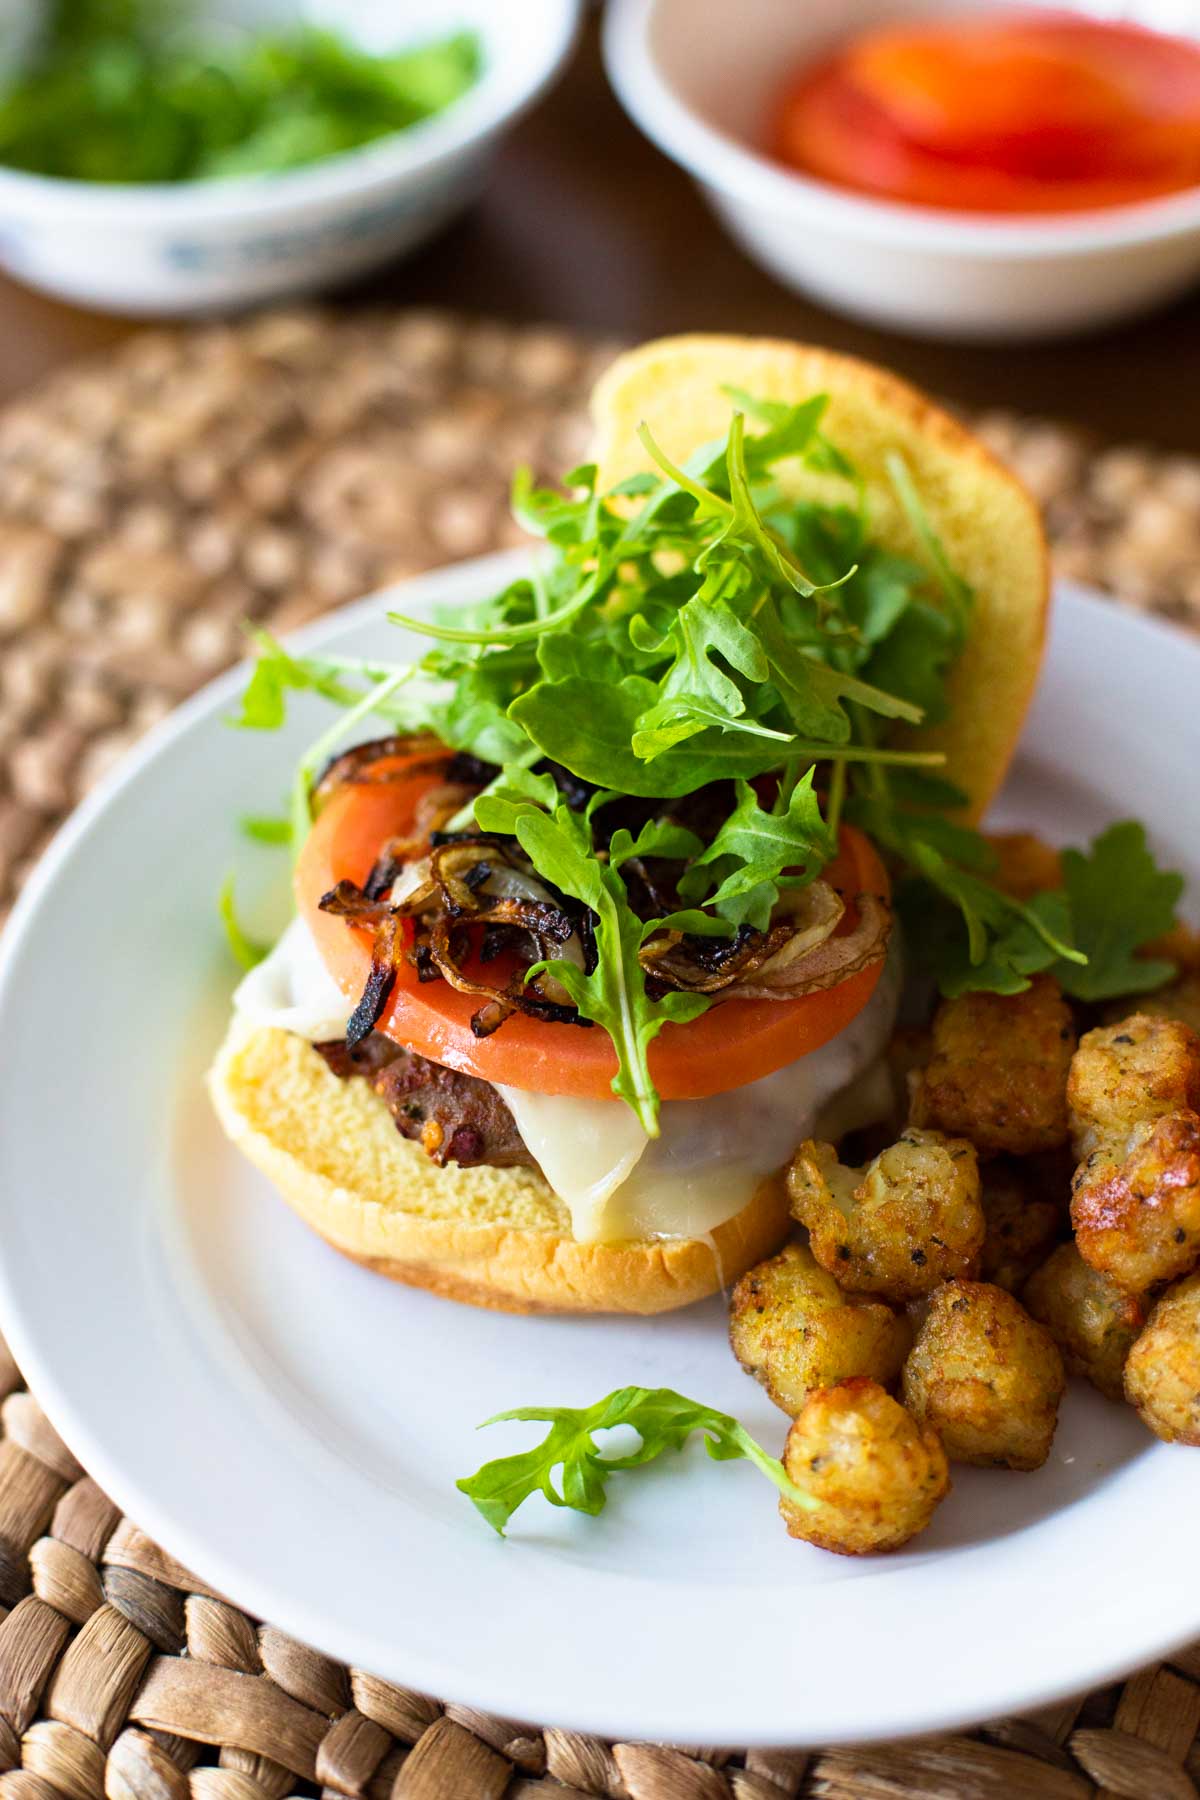 A turkey burger has cheese, tomato, and arugula piled up on top.